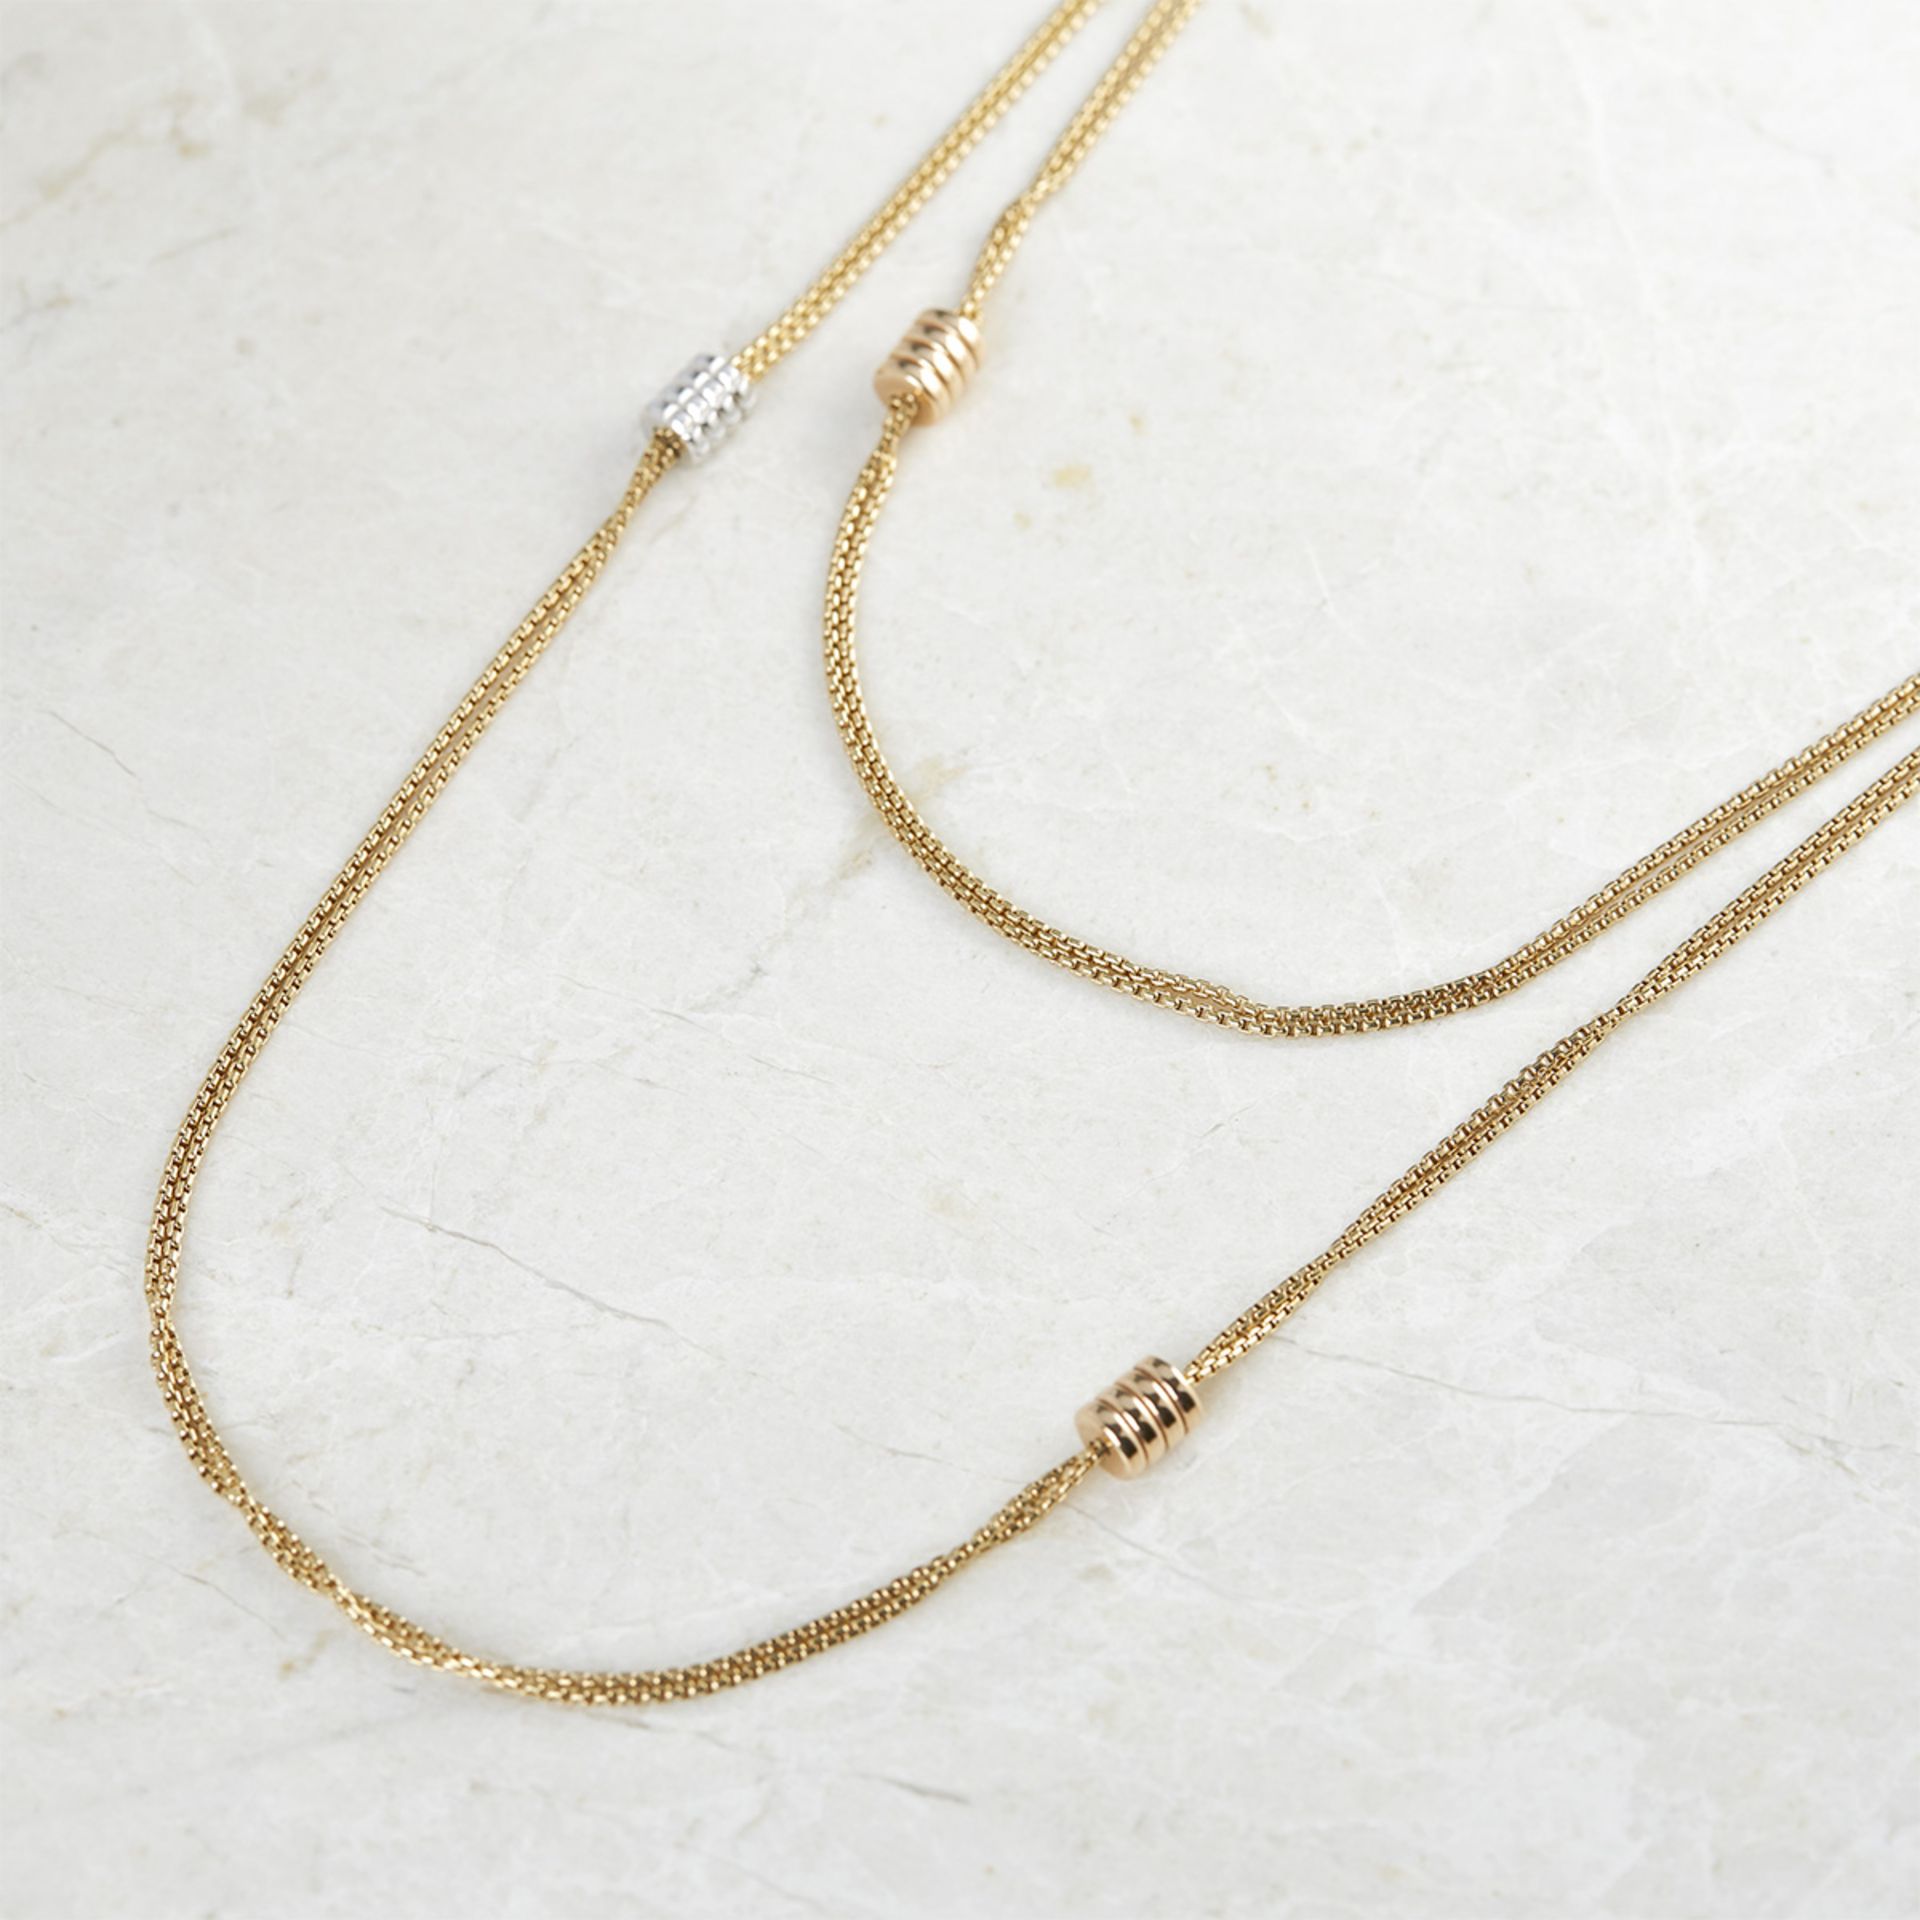 18k Yellow Gold Chain Necklace - Image 2 of 7